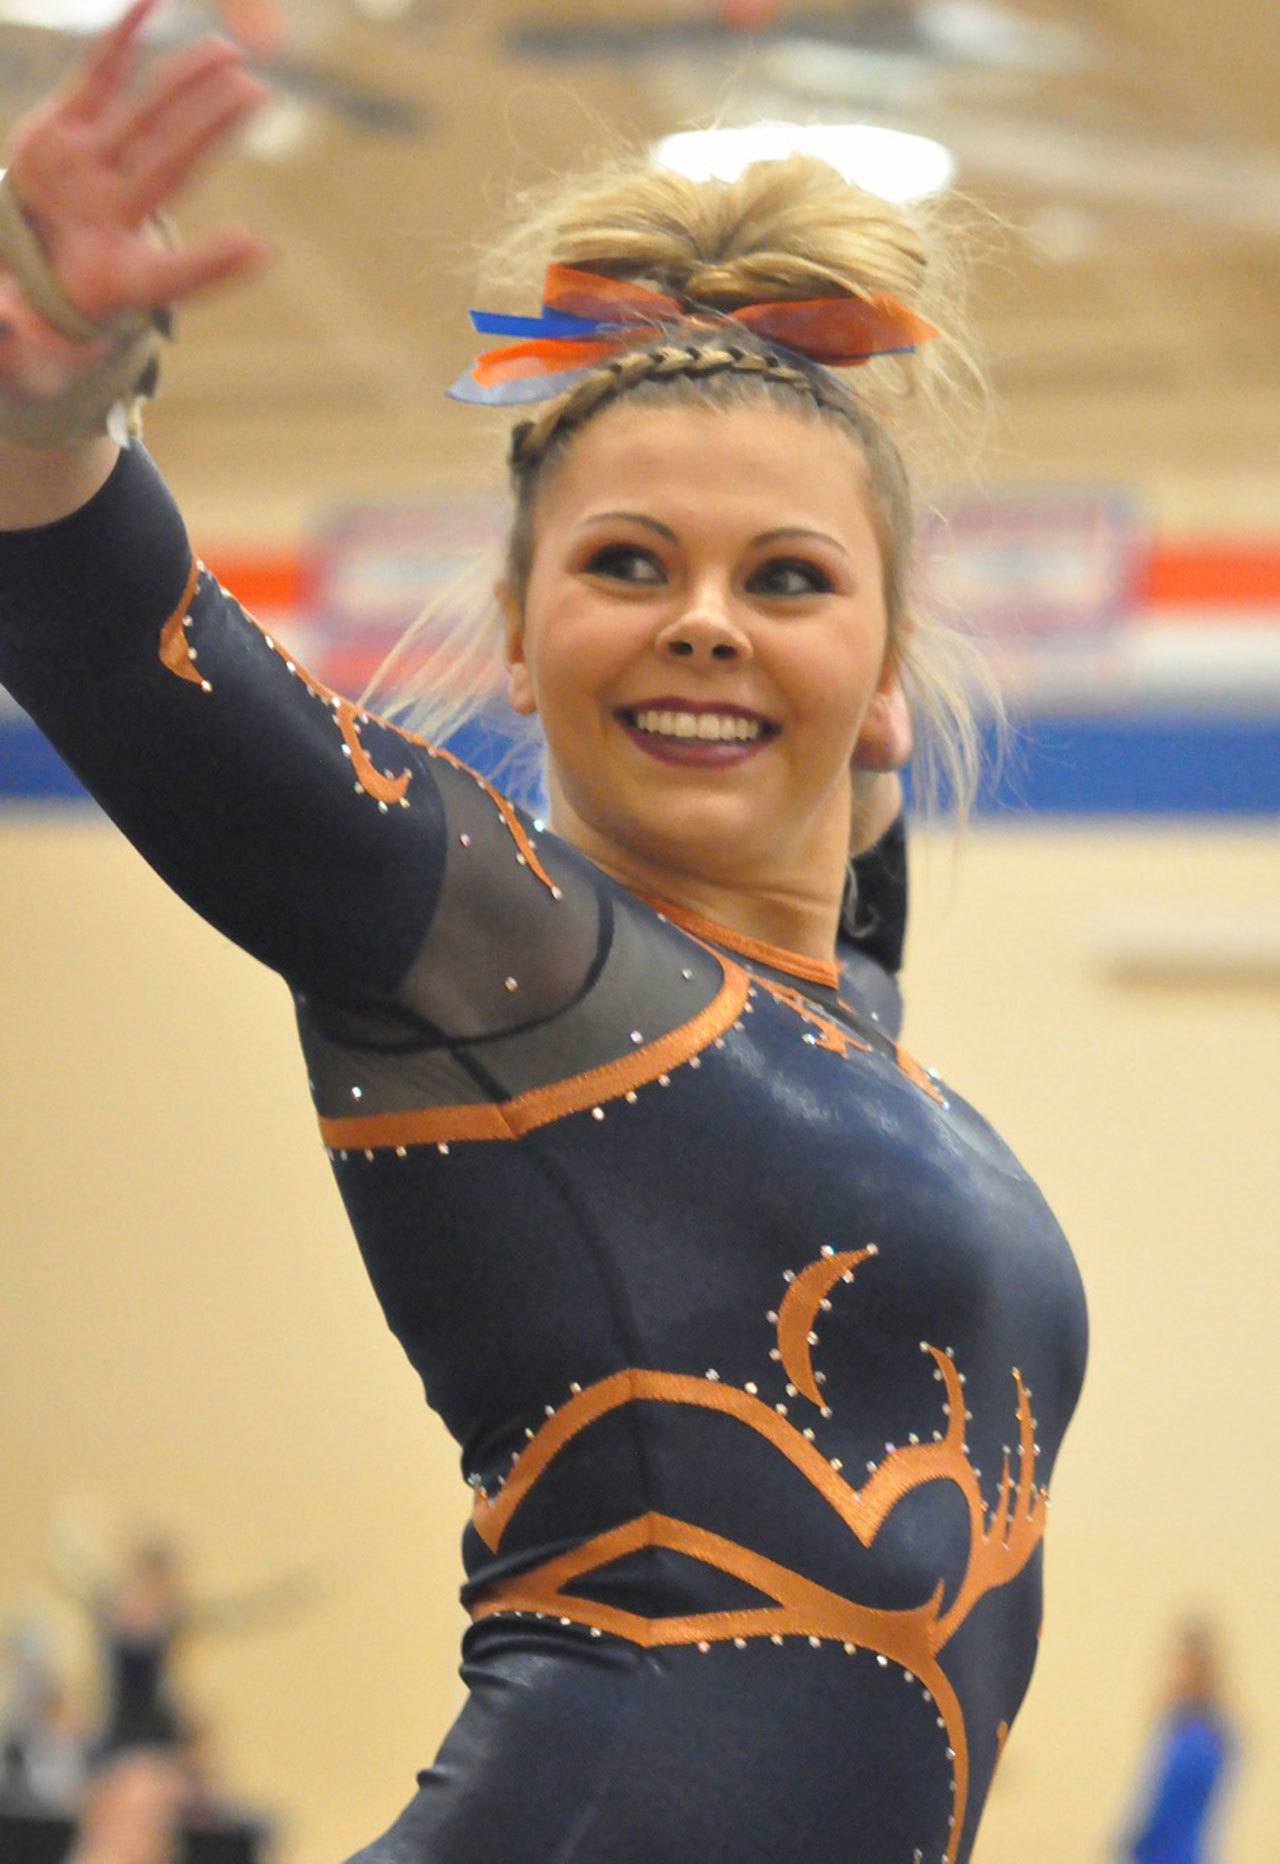 Auburn Mountainview’s Kayla Porter completes her routine in the floor exercise at the district competition in the Lions’ gymnasium Saturday. She scored a 9.325. RACHEL CIAMPI, Auburn Reporter